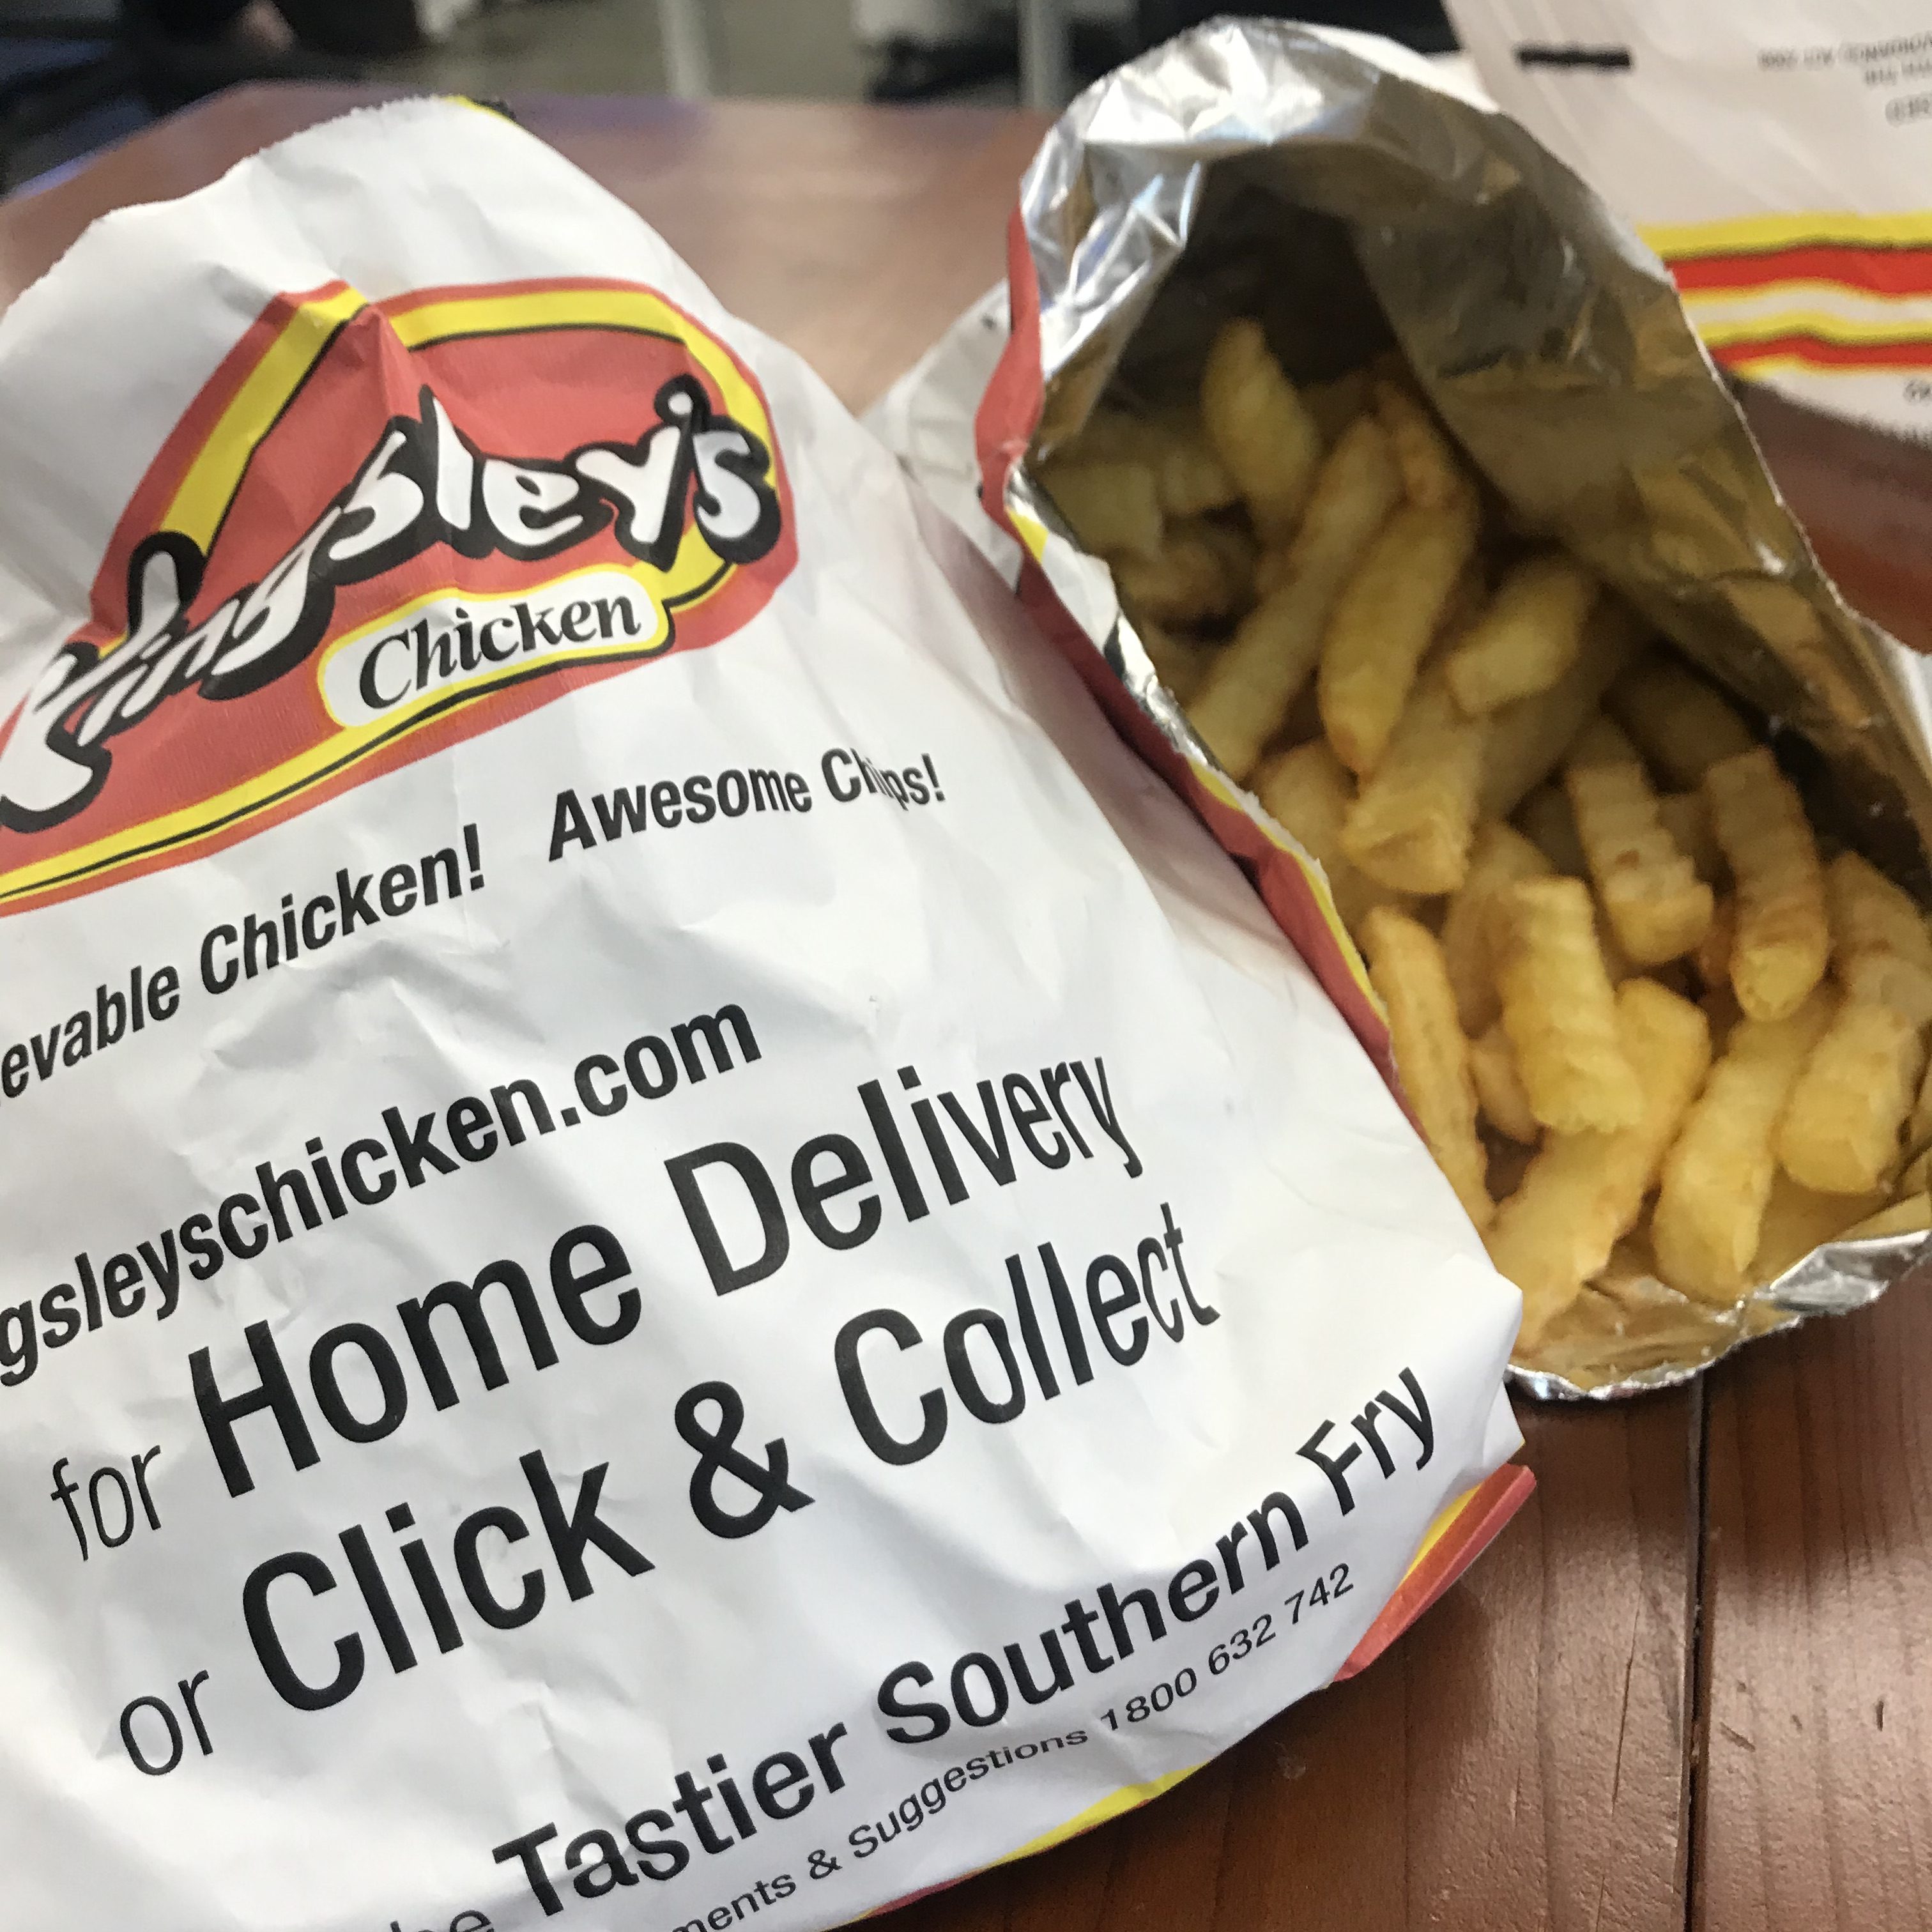 I hate to break it to you Canberra, but these aren't Australia's best chips